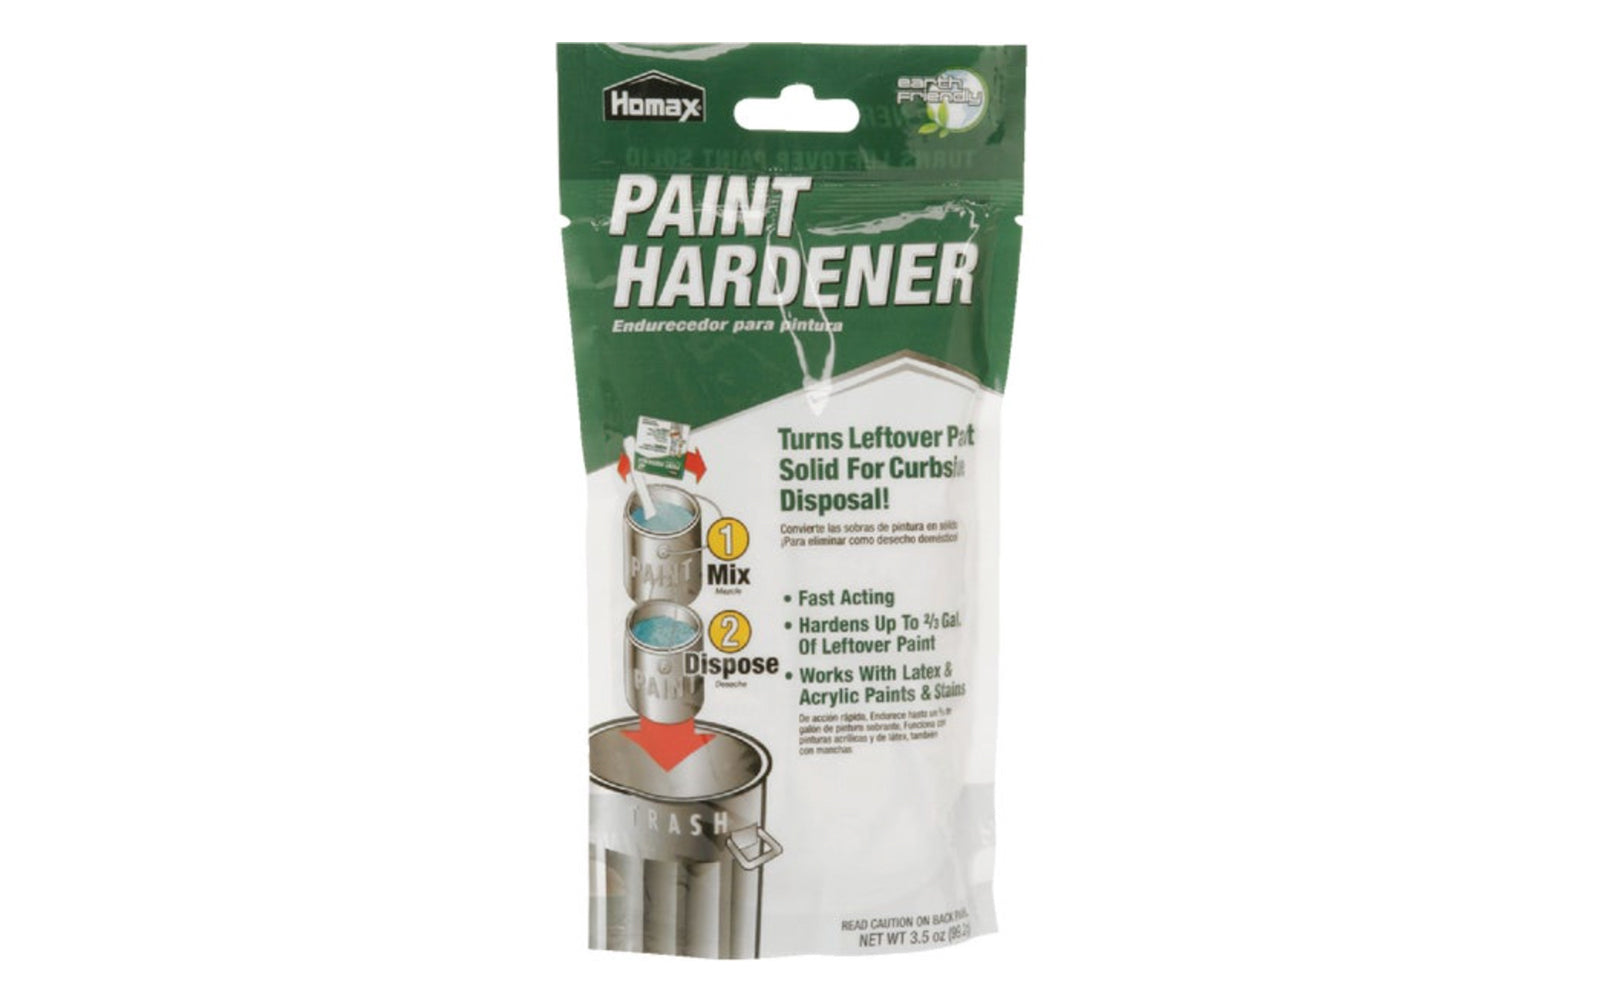 Homex Paint hardener quickly turns leftover paint solid for curbside disposal. Mix with paint, let harden, and dispose. Hardens up to 2/3 gallon of leftover paint. Works with latex & acrylic paints & stains. 3.5 oz. 041072035354